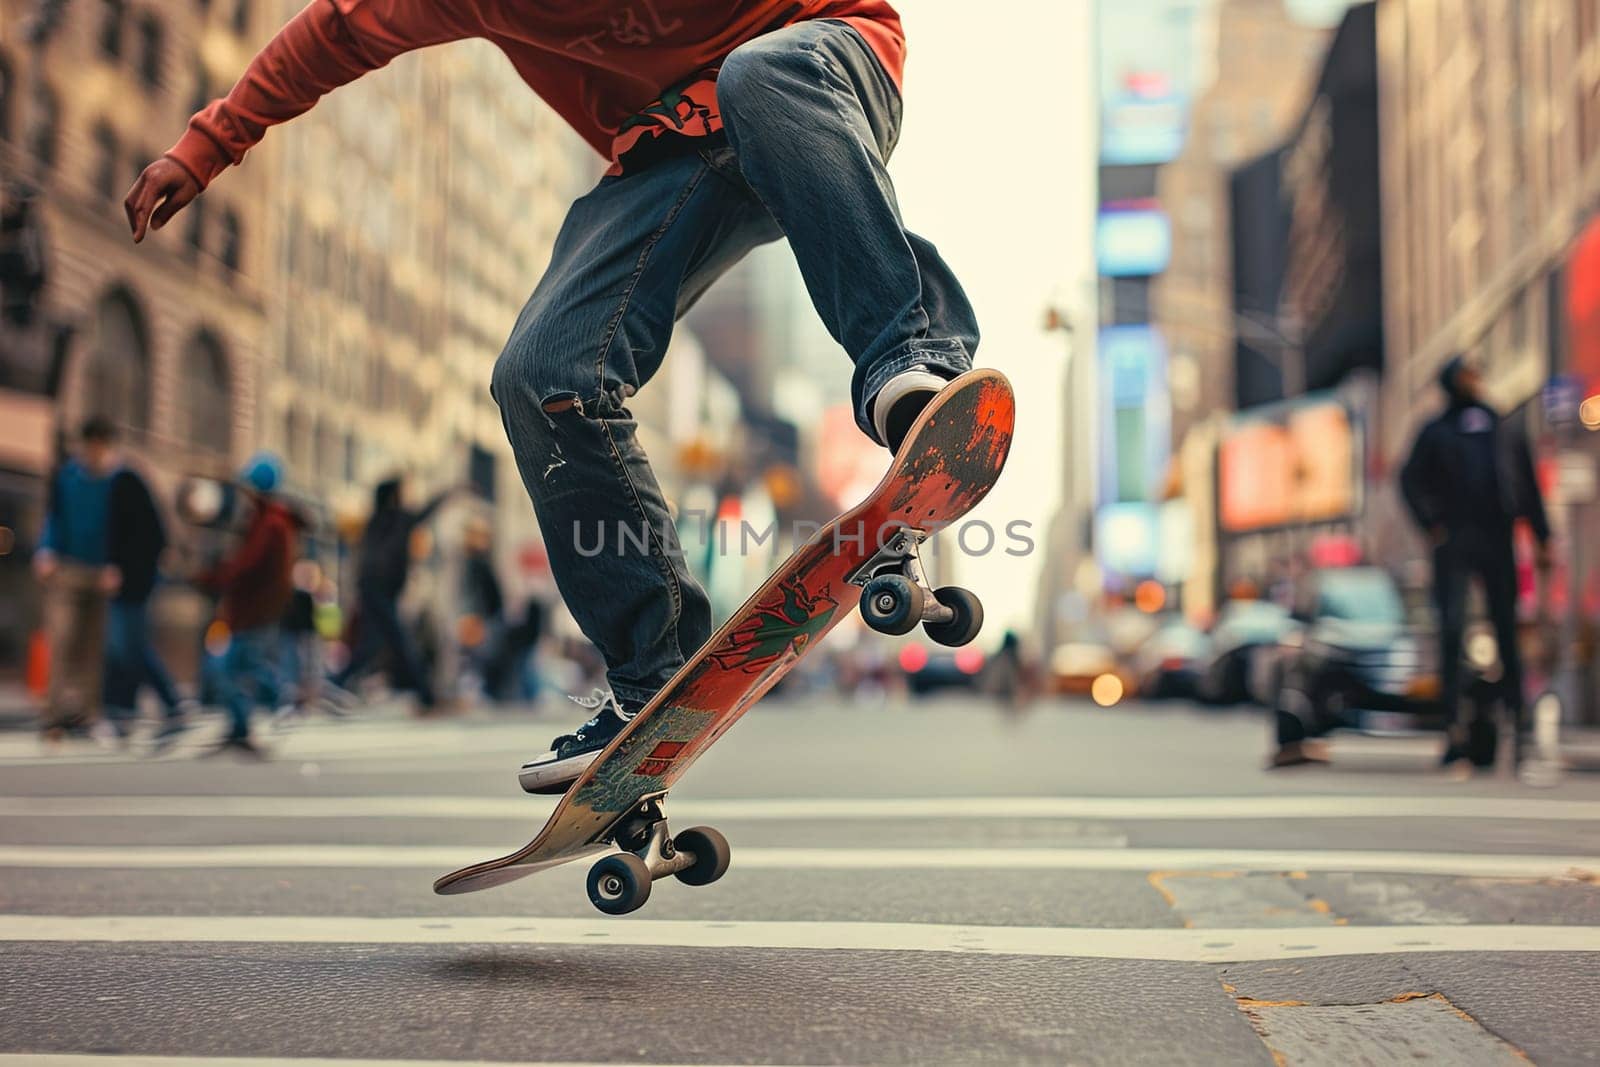 A man riding a skateboard down a city street lined with tall buildings, showcasing urban skateboarding culture.